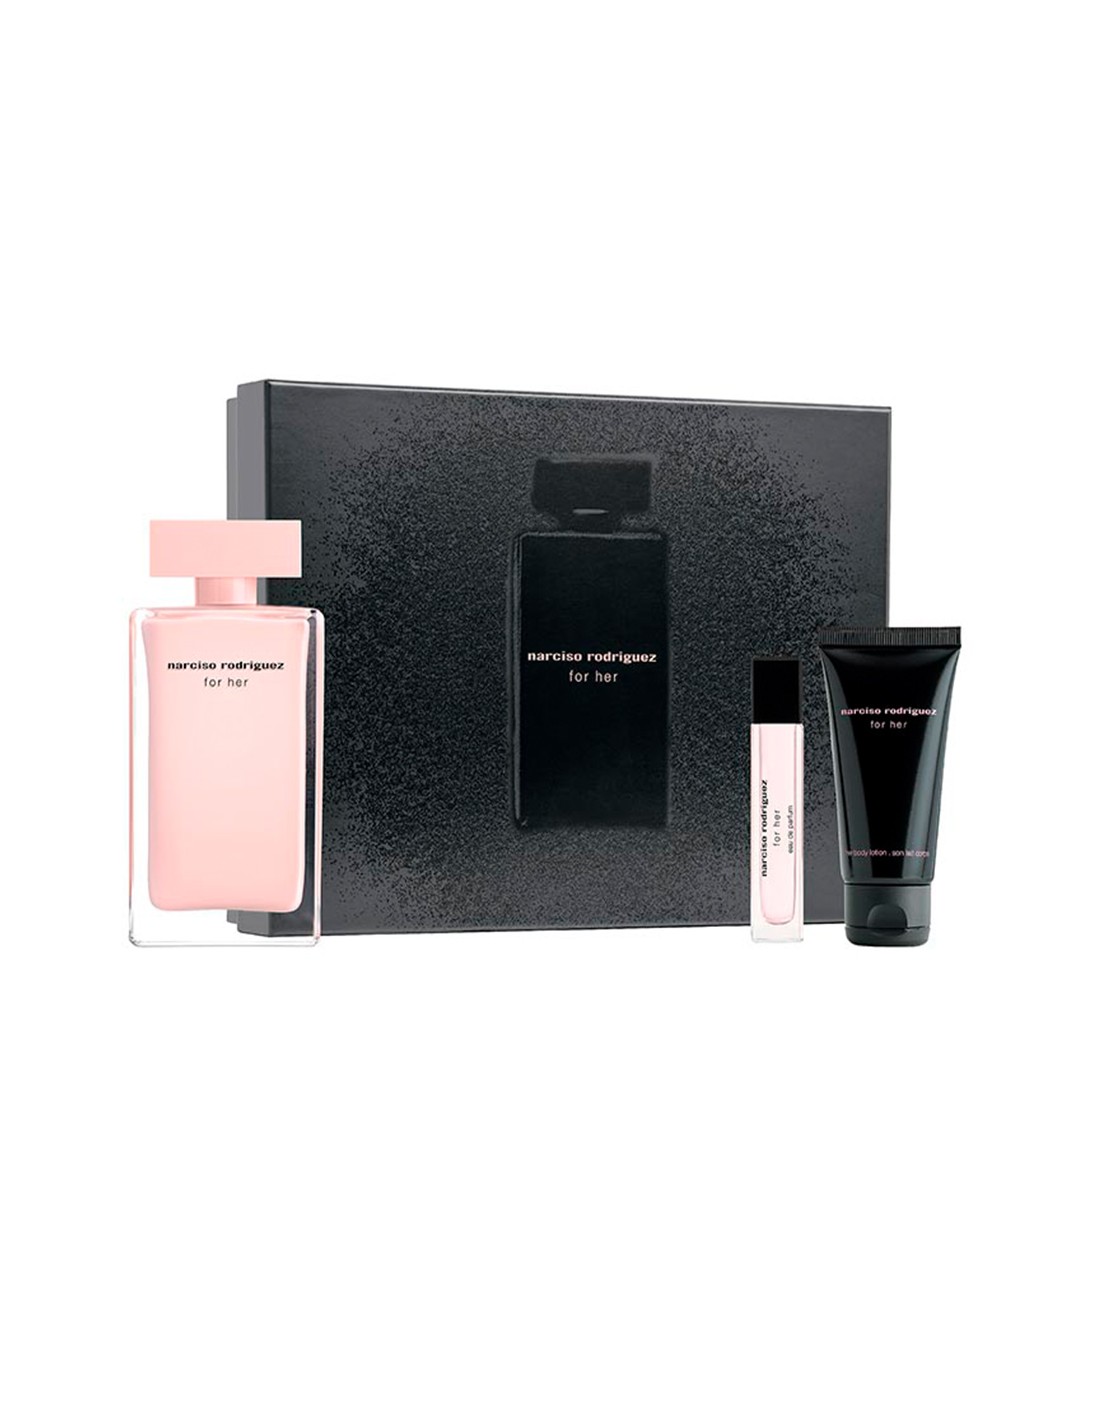 Estuche Narciso Rodriguez For HER
